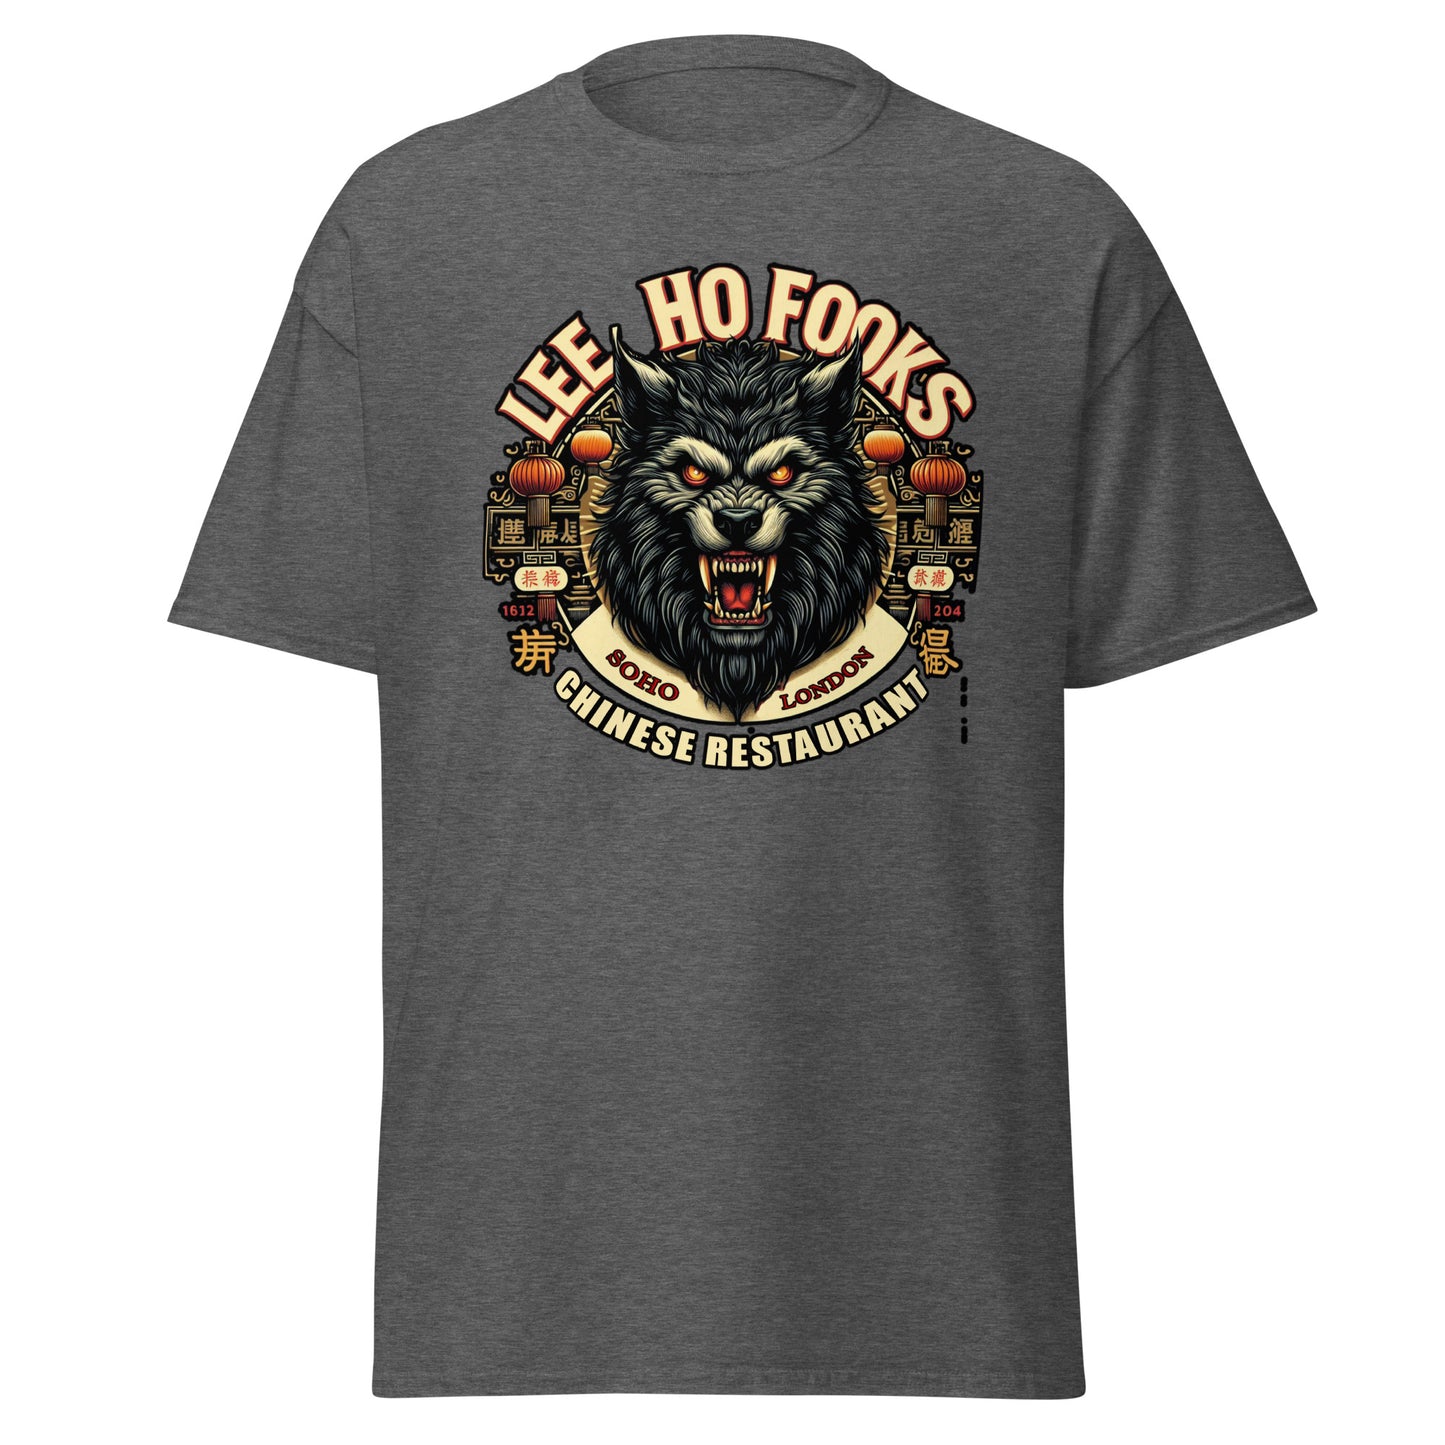 Howling Style: Lee Ho Fook's Chinese Restaurant T-Shirt Collection